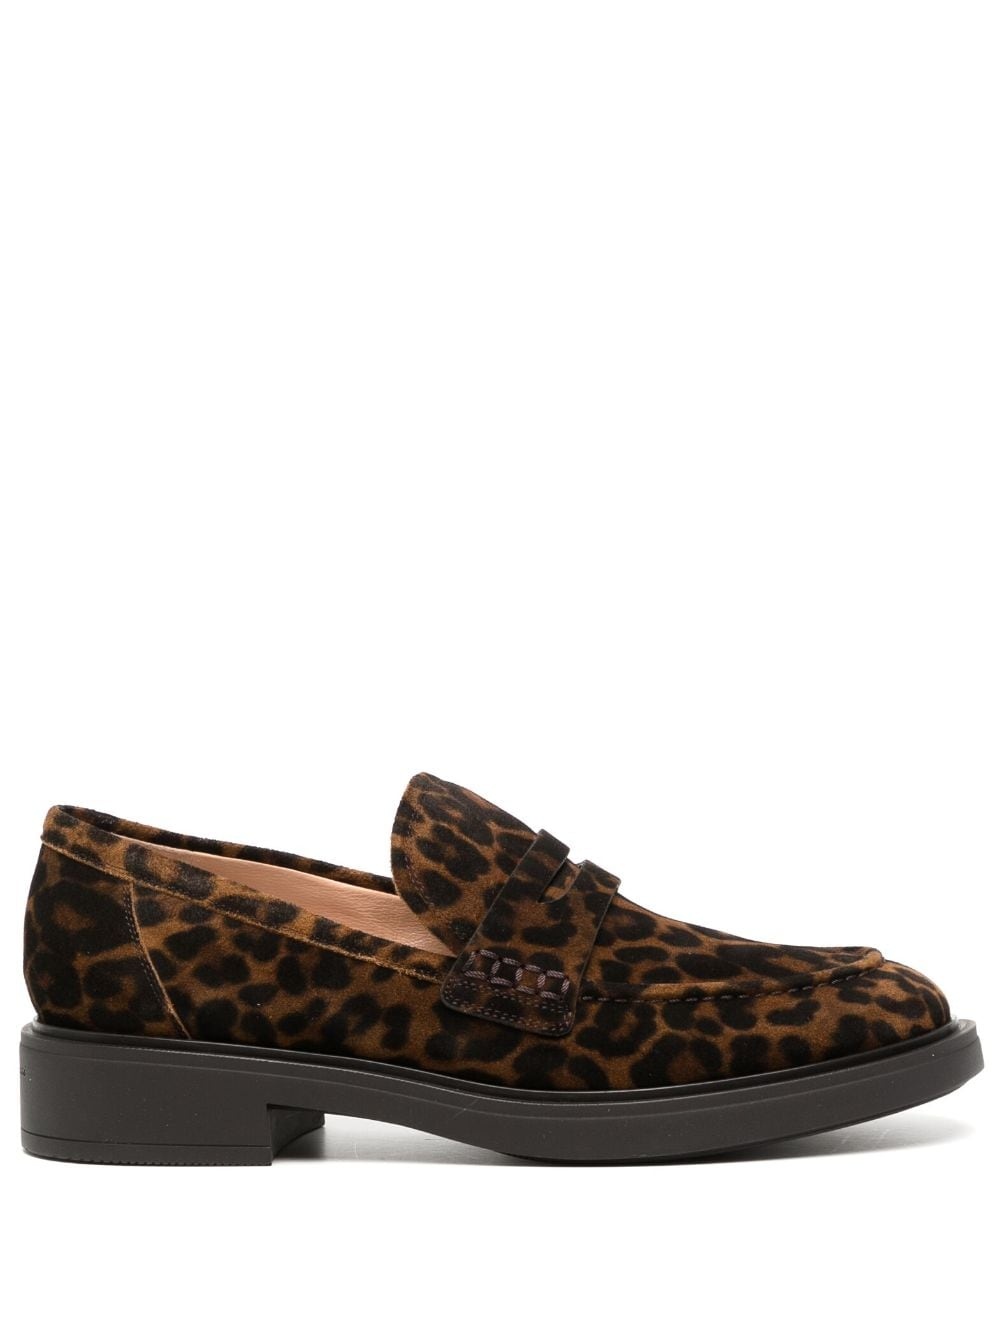 leopard-print leather loafers - 1